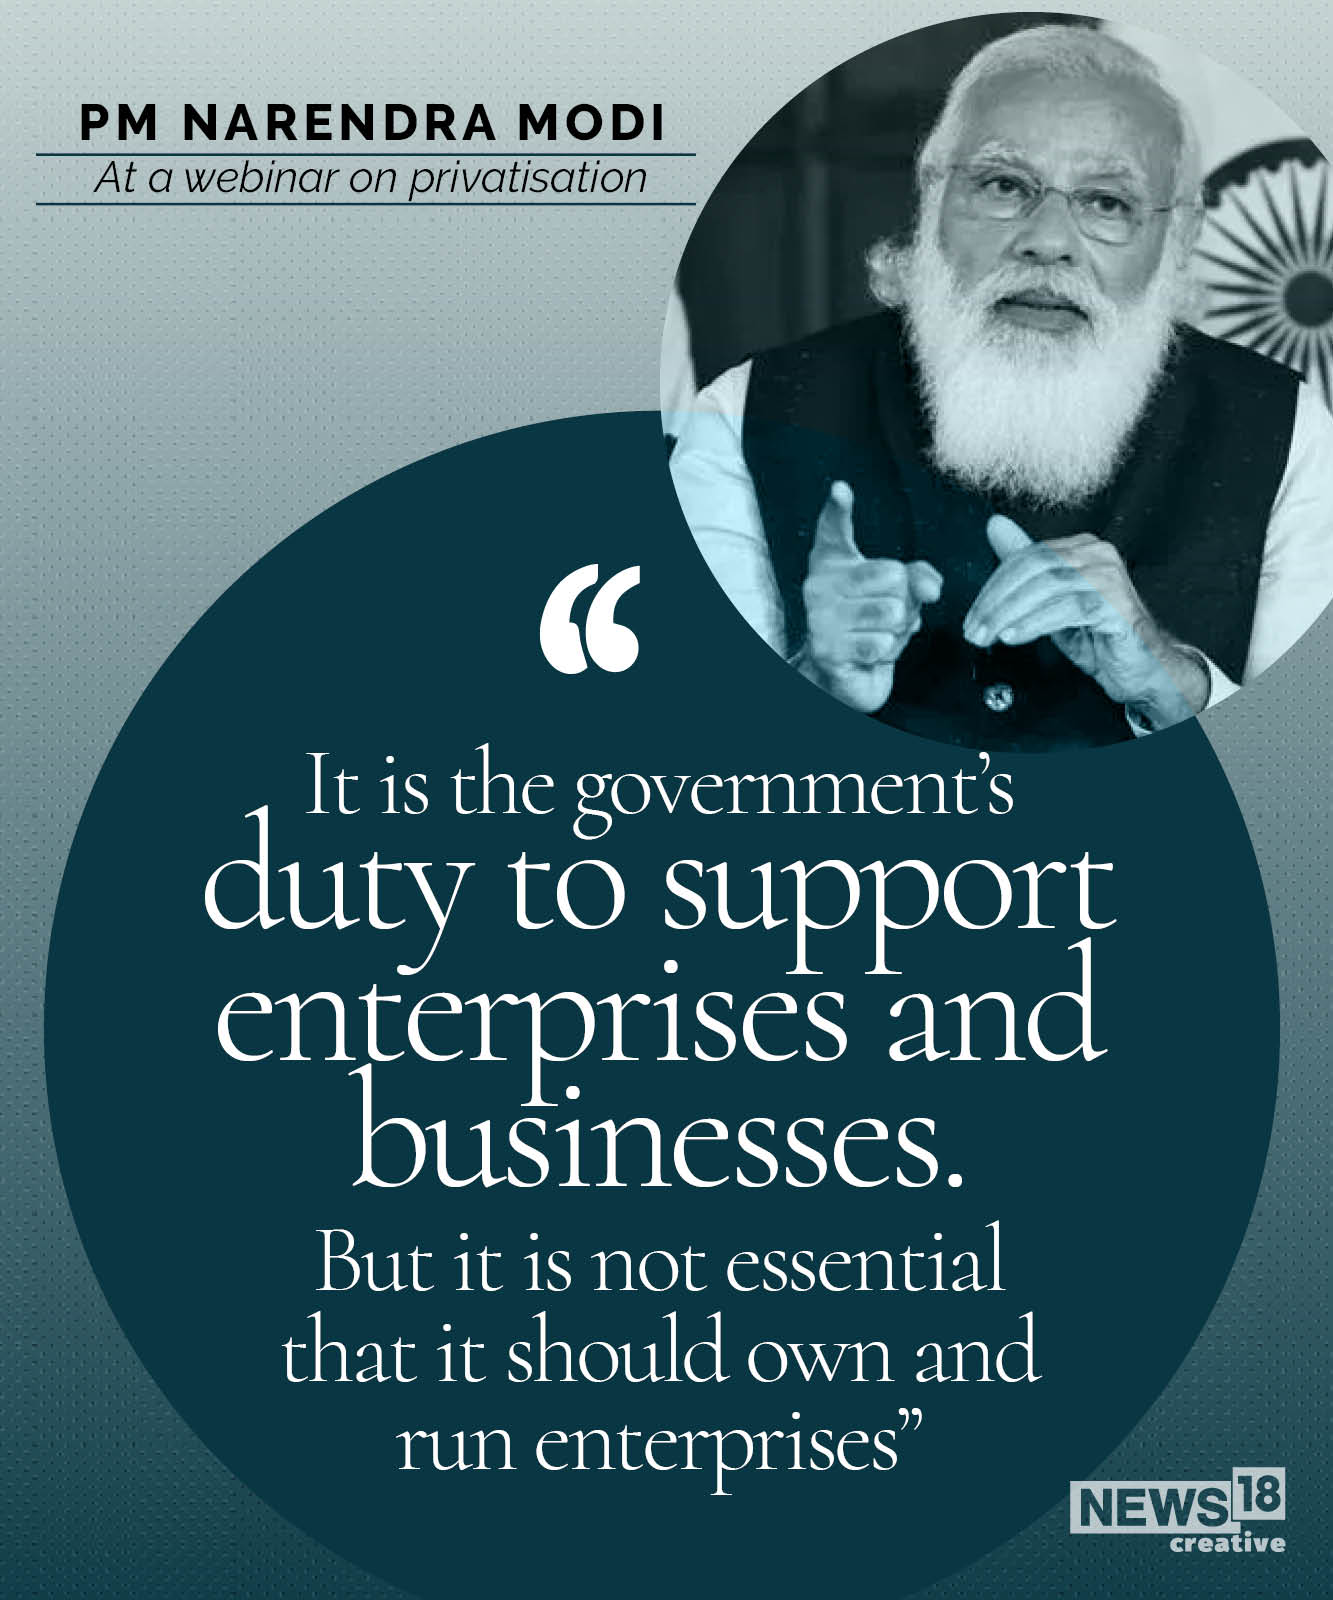 Govt has no business being in business: PM Modi